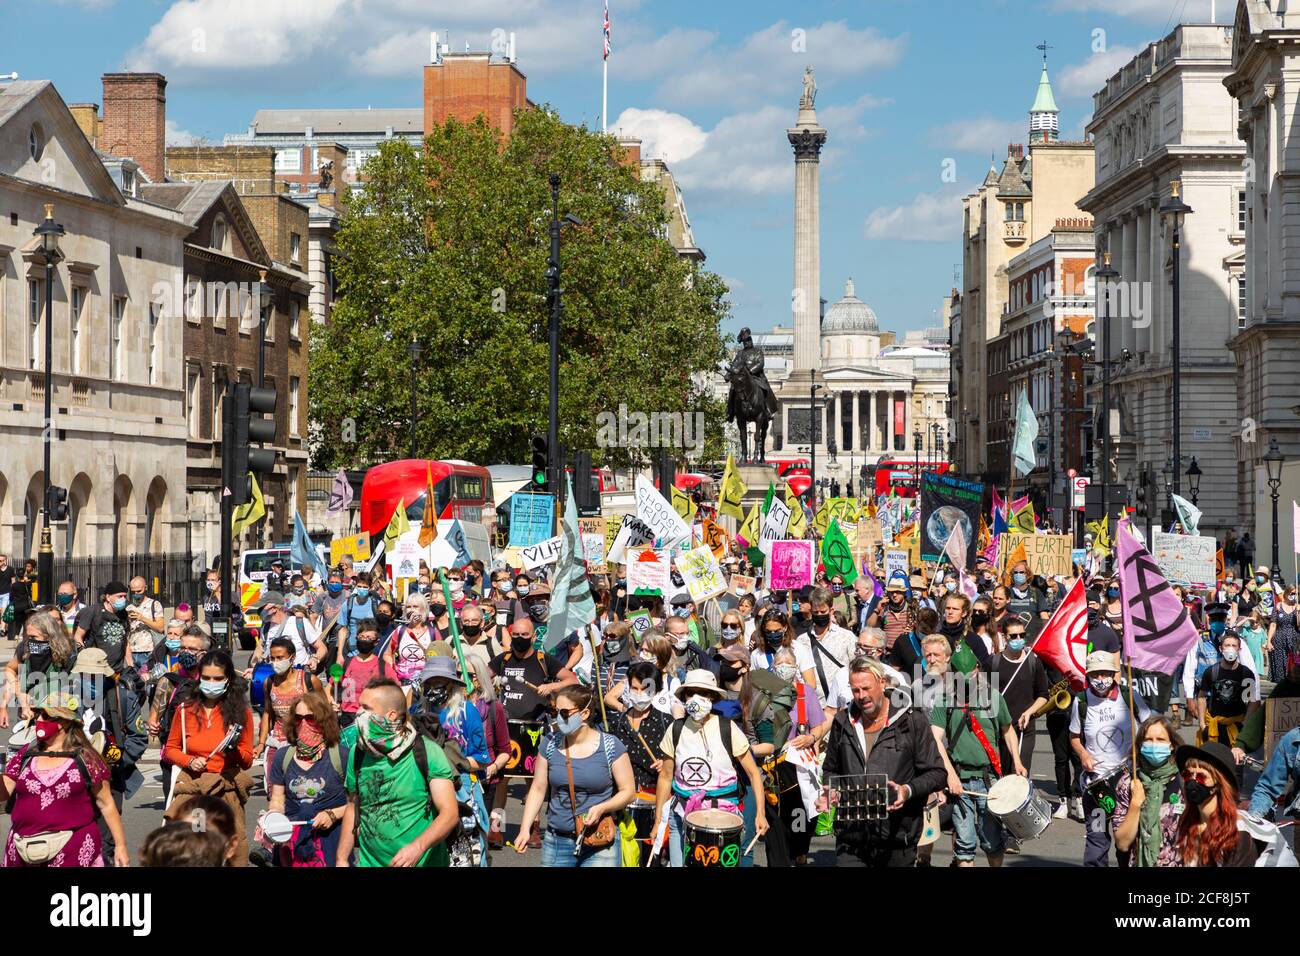 Protesters with banners march towards Parliament during Extinction Rebellion demonstration, London, 1 September 2020 Stock Photo